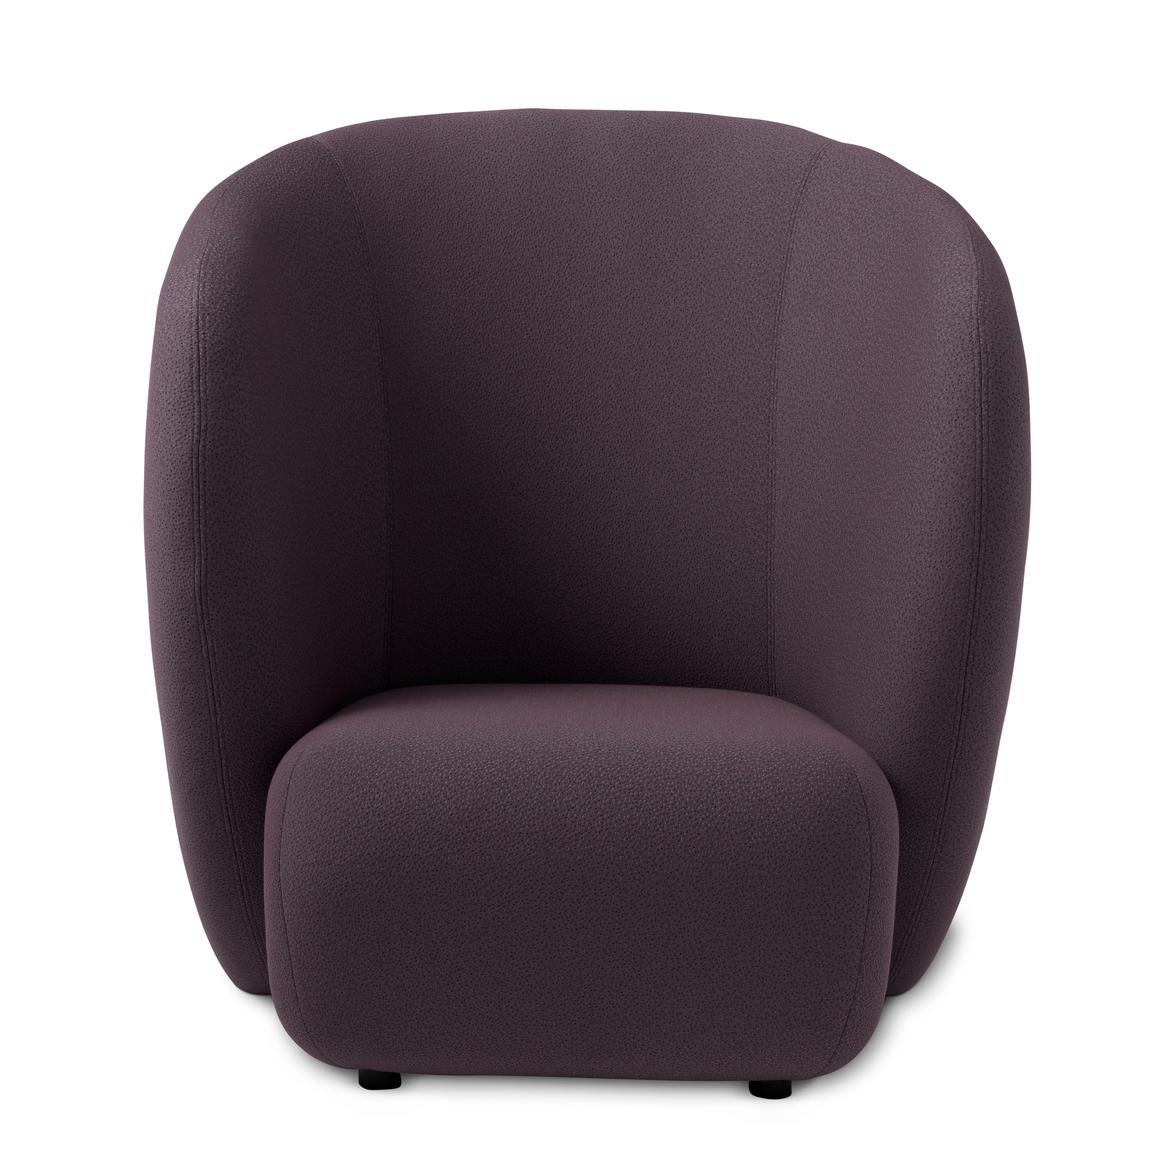 Haven Lounge Chair Sprinkles Eggplant by Warm Nordic
Dimensions: D107 x W84 x H 110 cm
Material: Textile upholstery, Foam, Spring system, Wood.
Weight: 50 kg
Also available in different colours and finishes. Please contact us.

The Haven